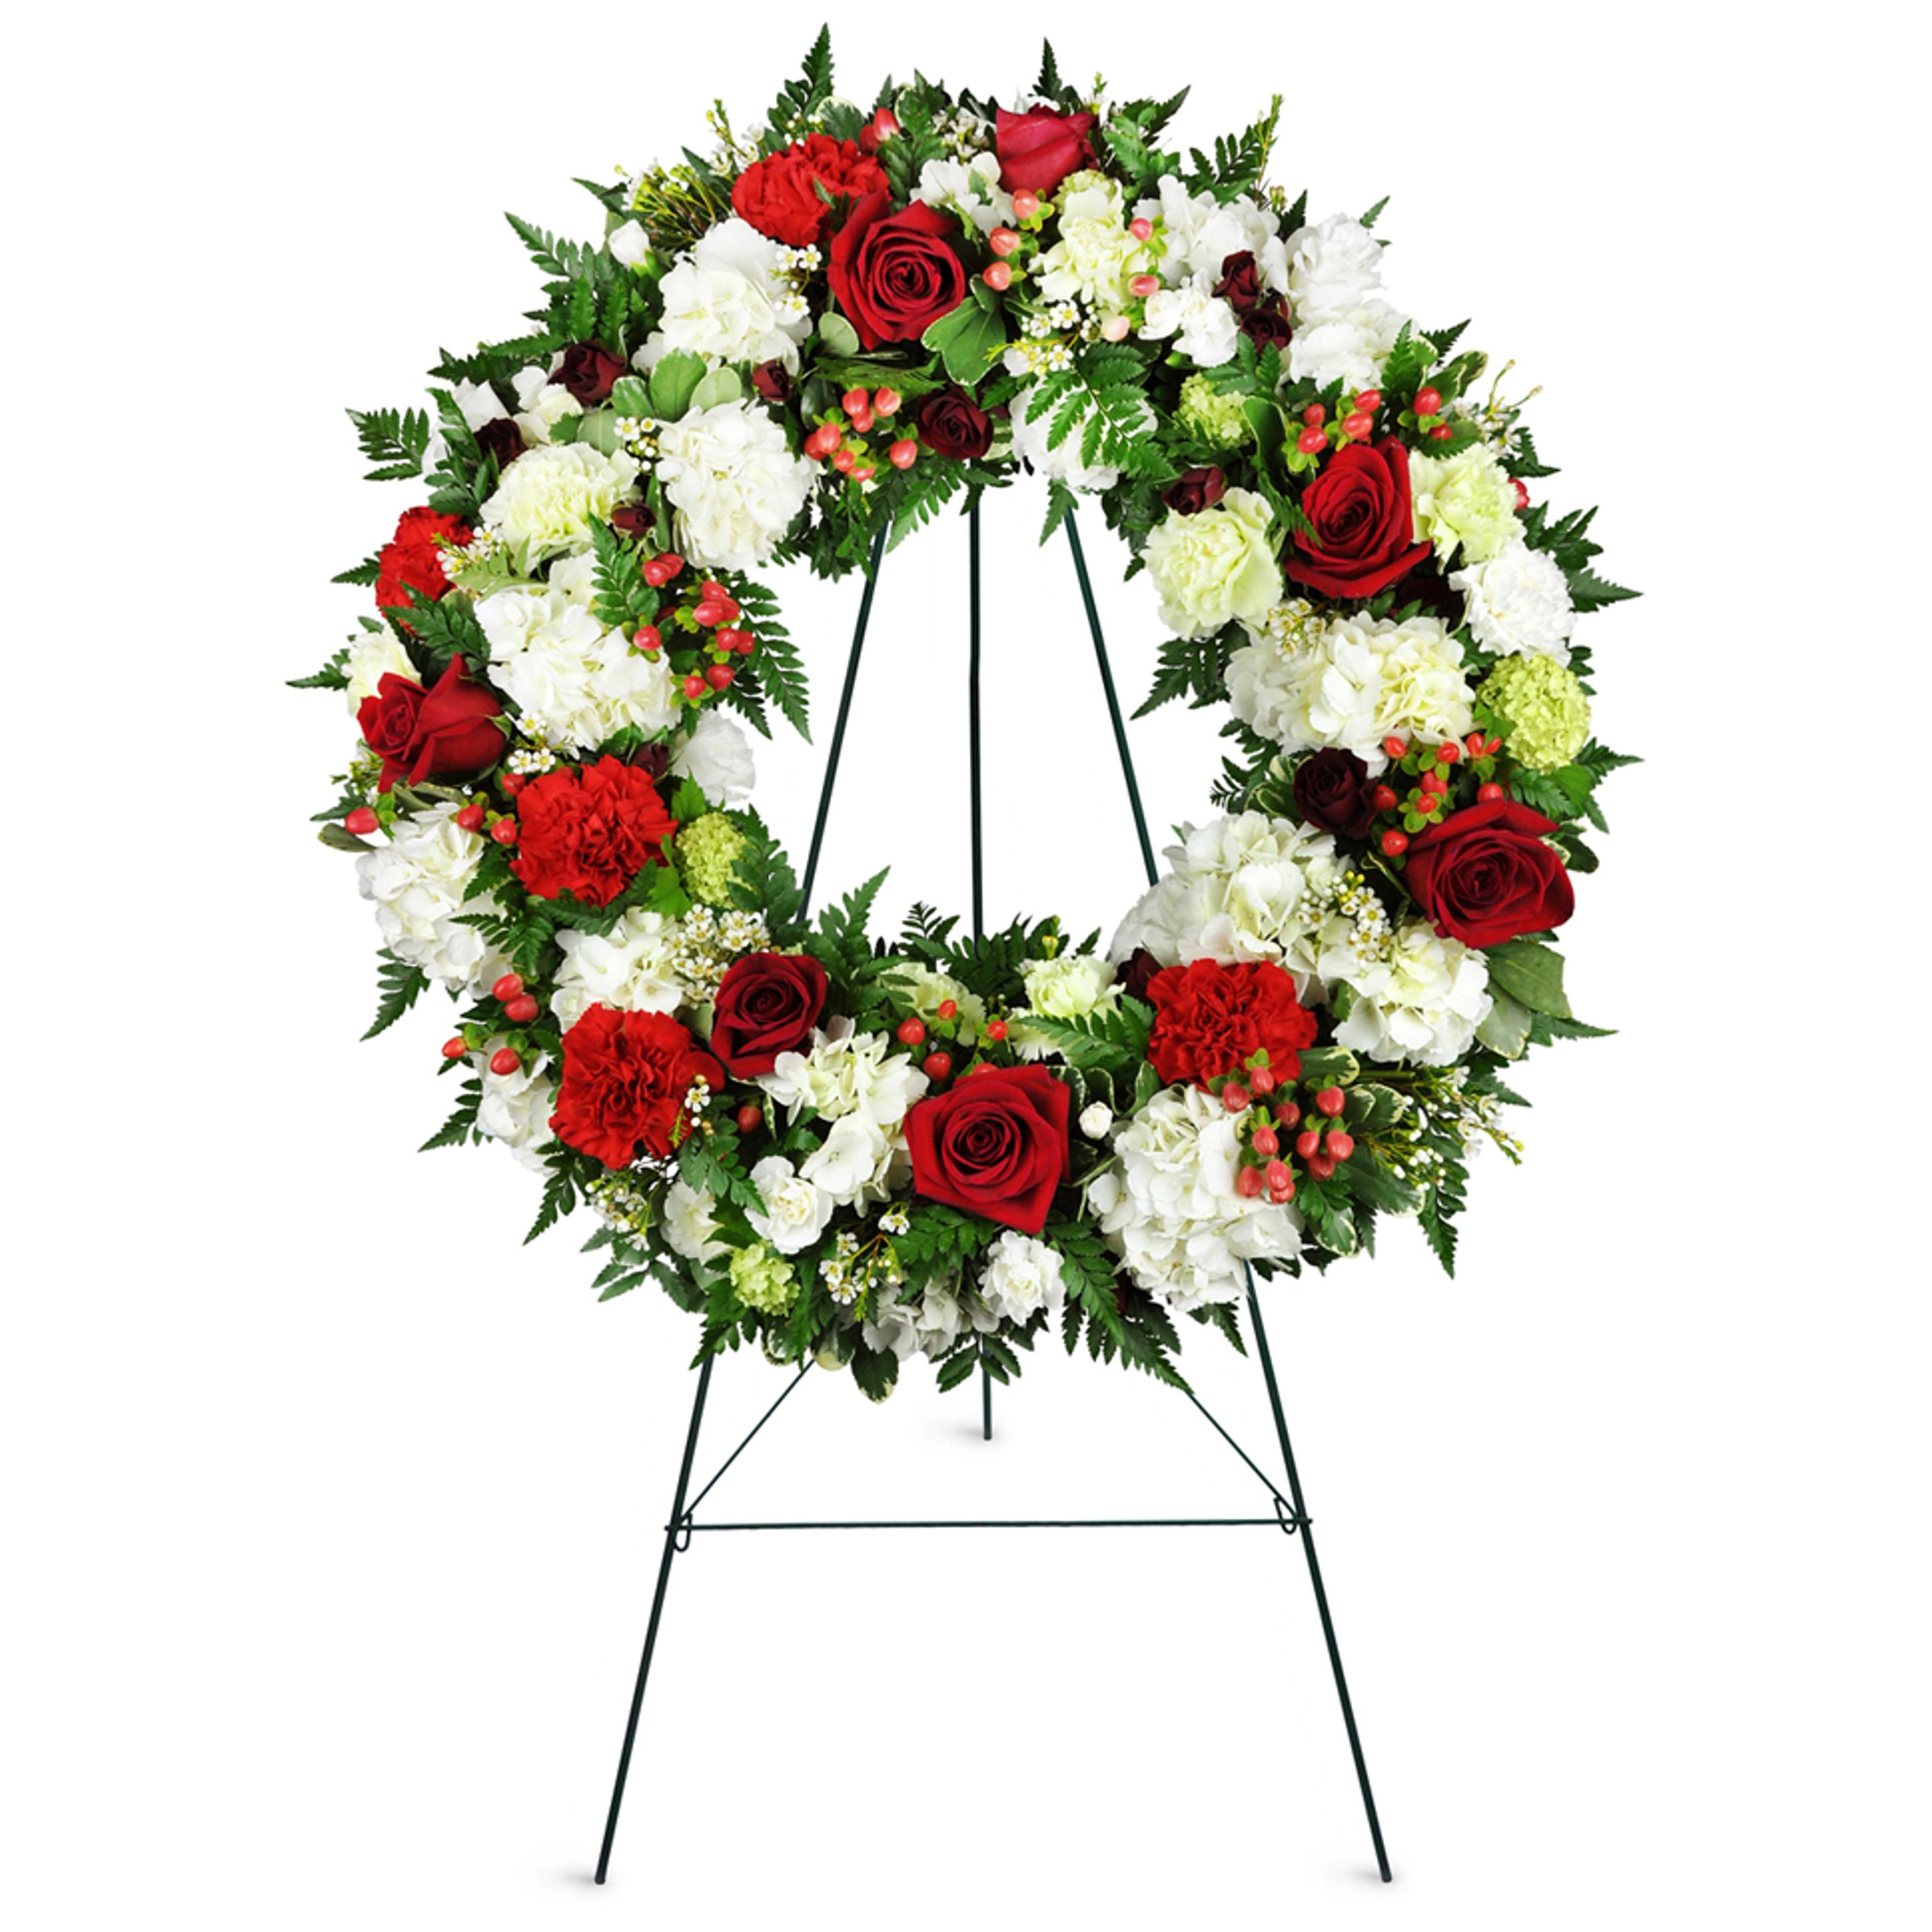 Standing spray wreath with red and white flowers and green accents. An ever looping sign perfect tribute for funerals and sympathy.